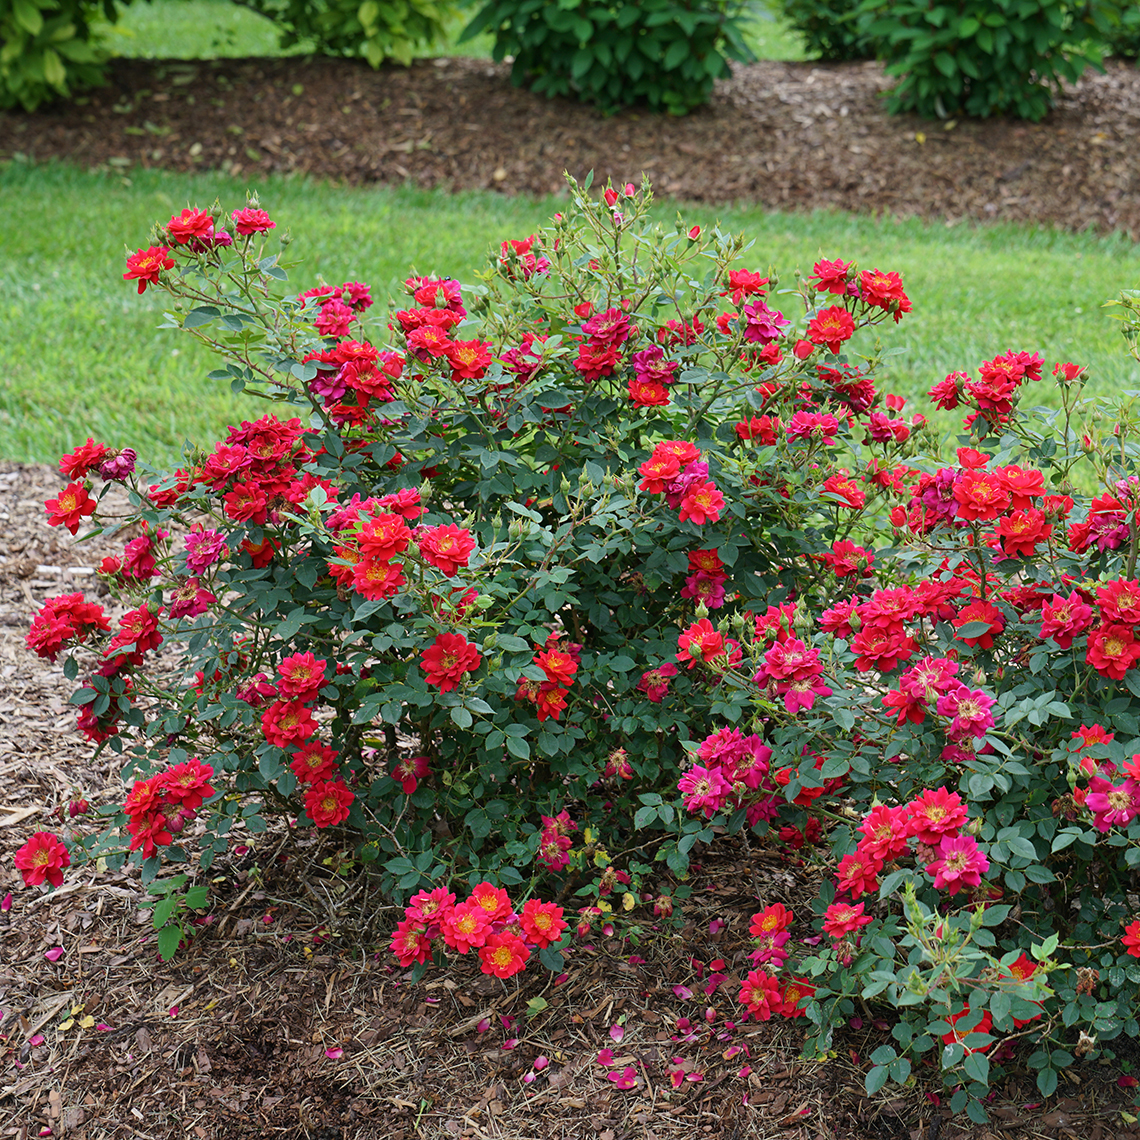 Mounded Oso Easy Urban Legend Rosa with dozens of scarlet flowers and buds